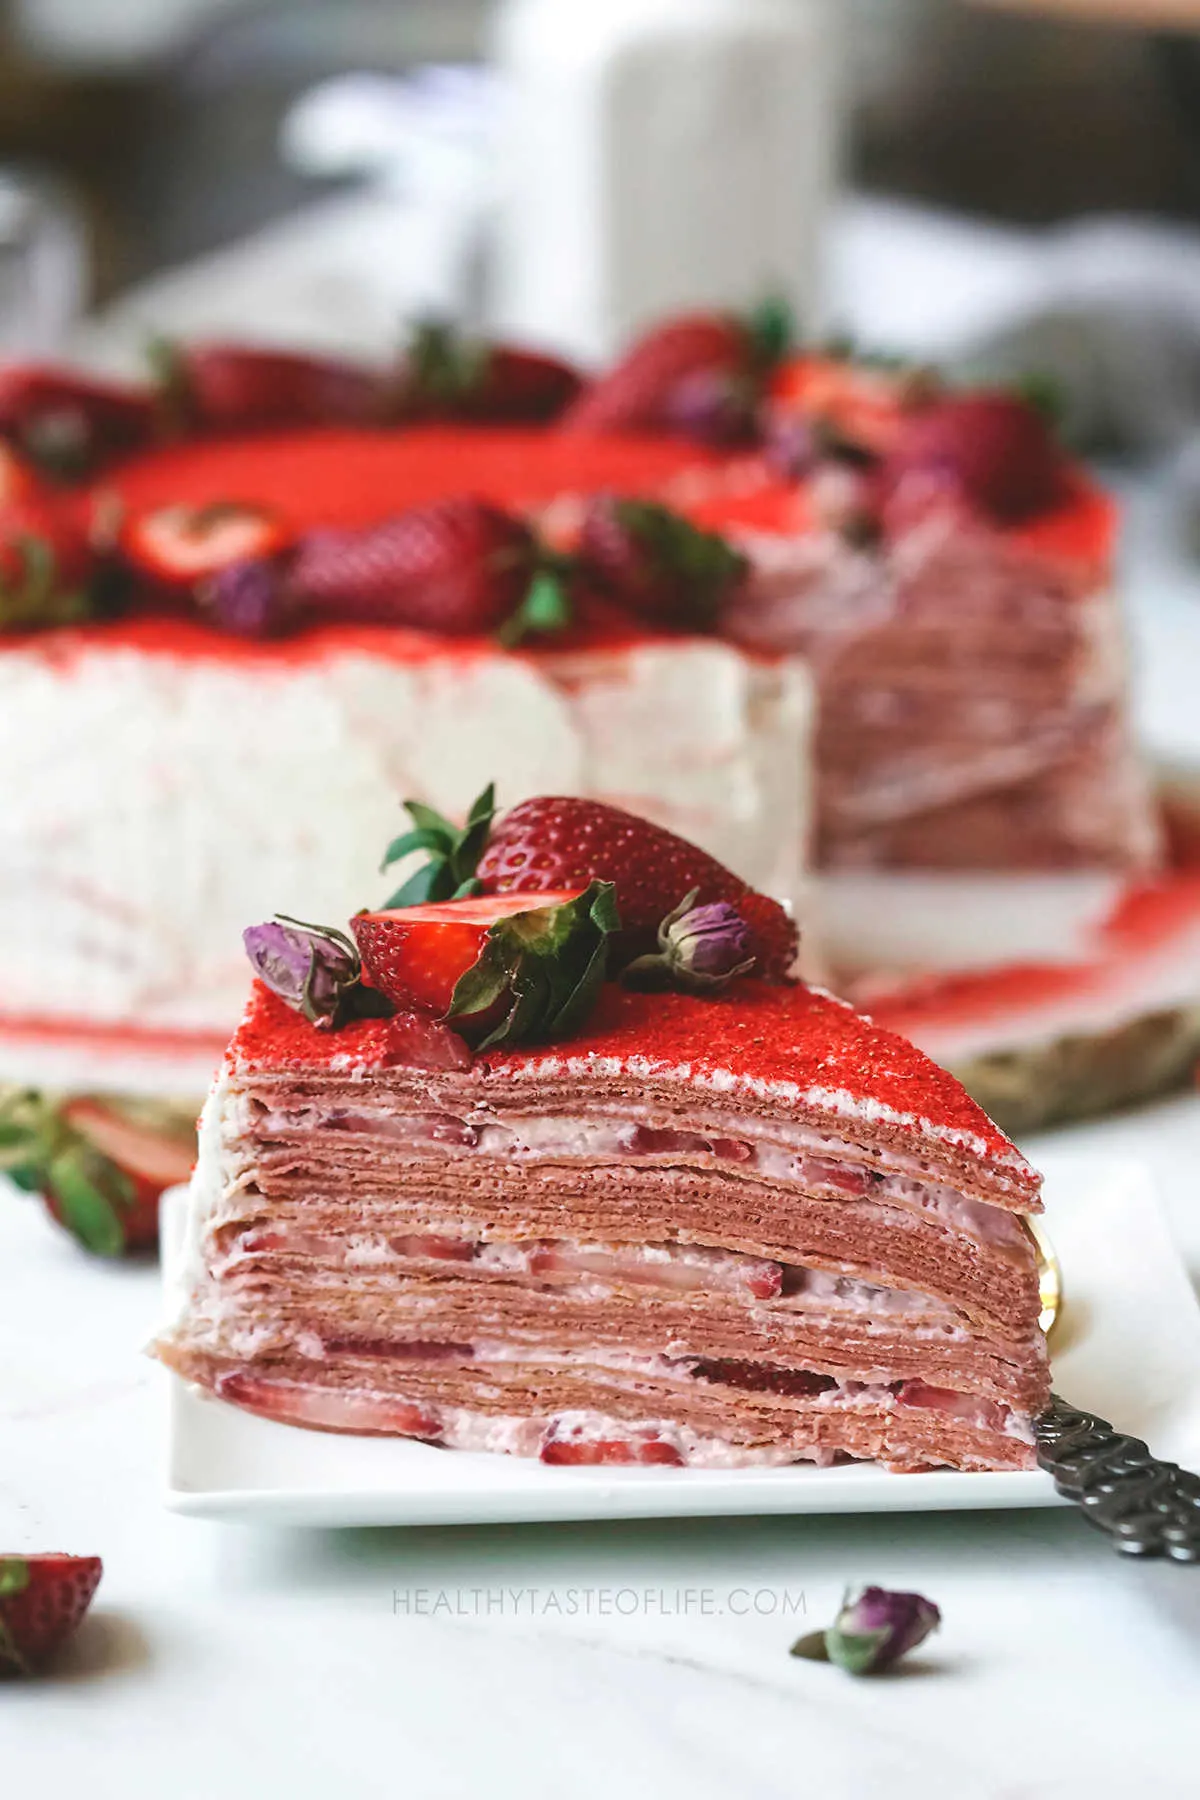 A slice of strawberry crepe cake with fresh strawberries between layers.